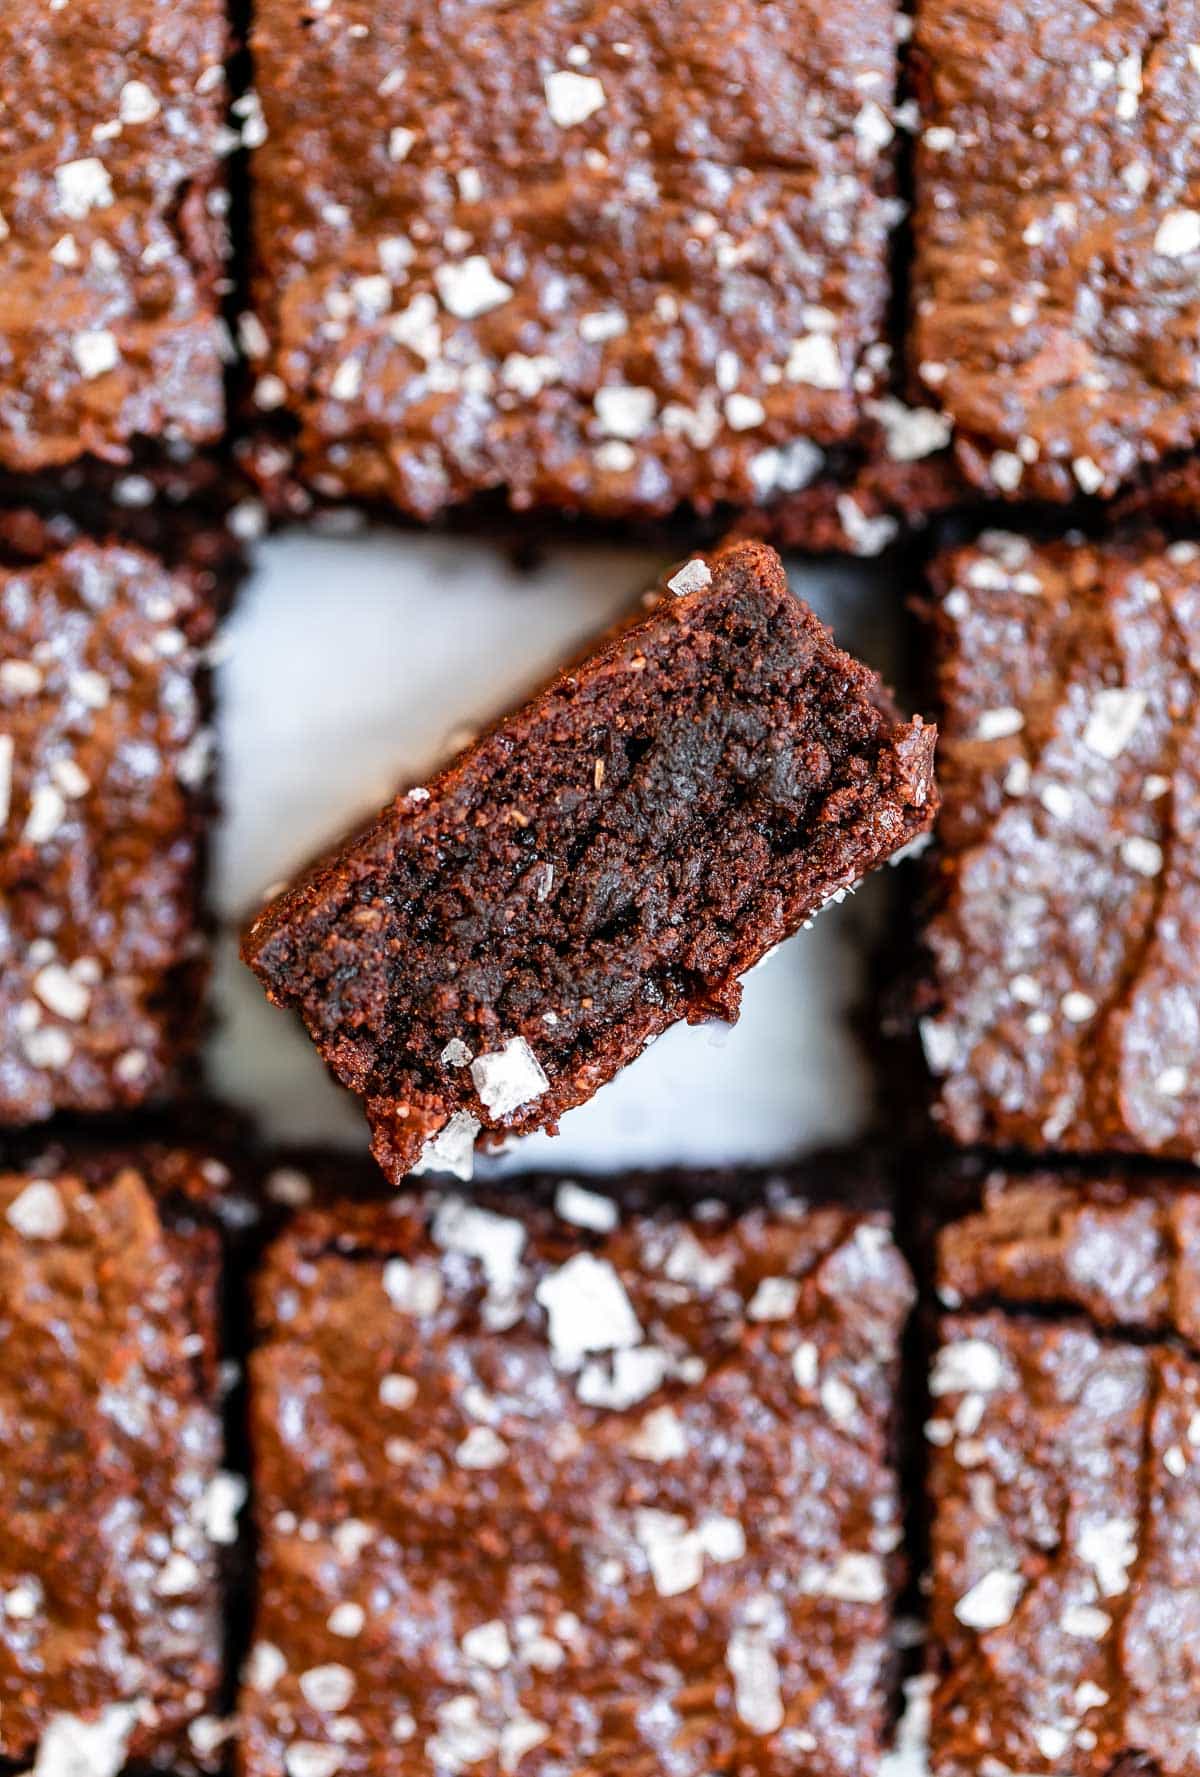 One brownie on the side to show texture.